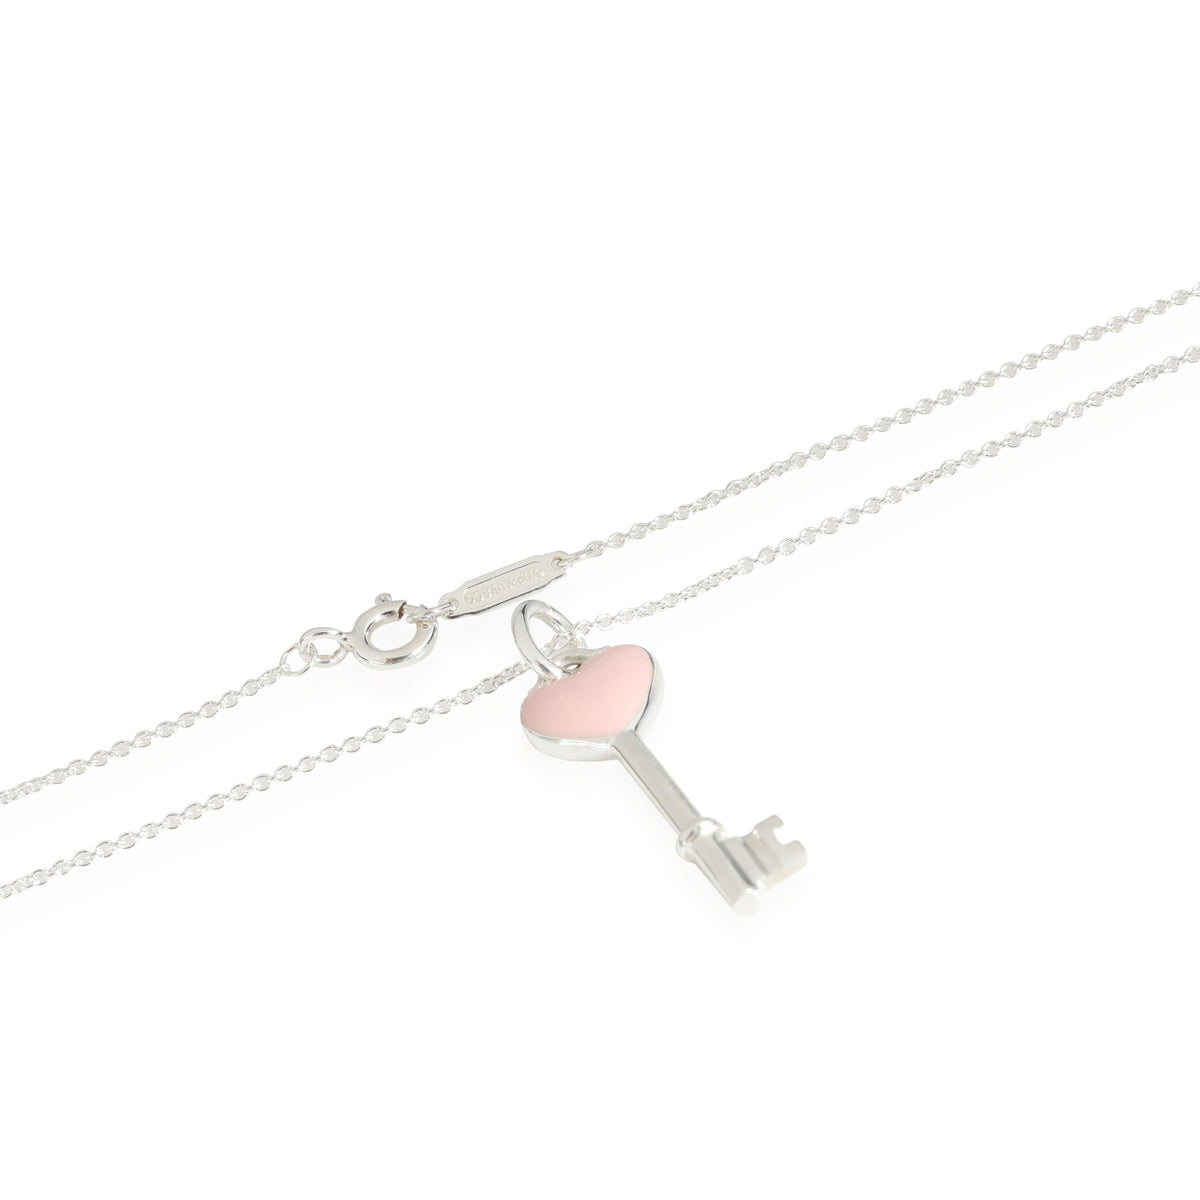 Elsa Peretti® Open Heart pendant in sterling silver with a pink sapphire. |  Tiffany & Co.